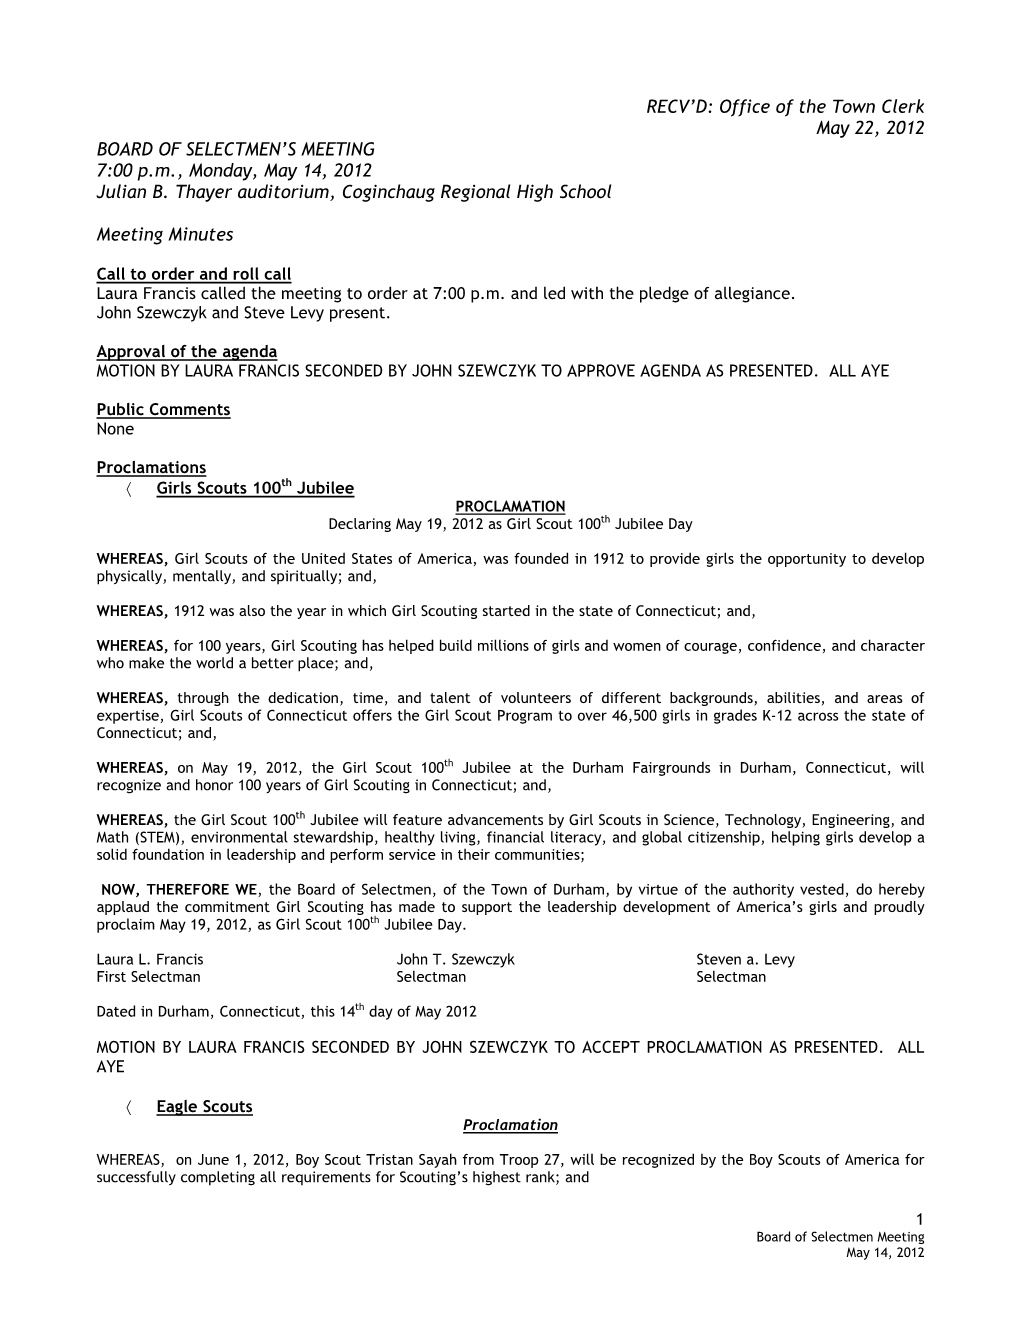 RECV'd: Office of the Town Clerk May 22, 2012 BOARD OF